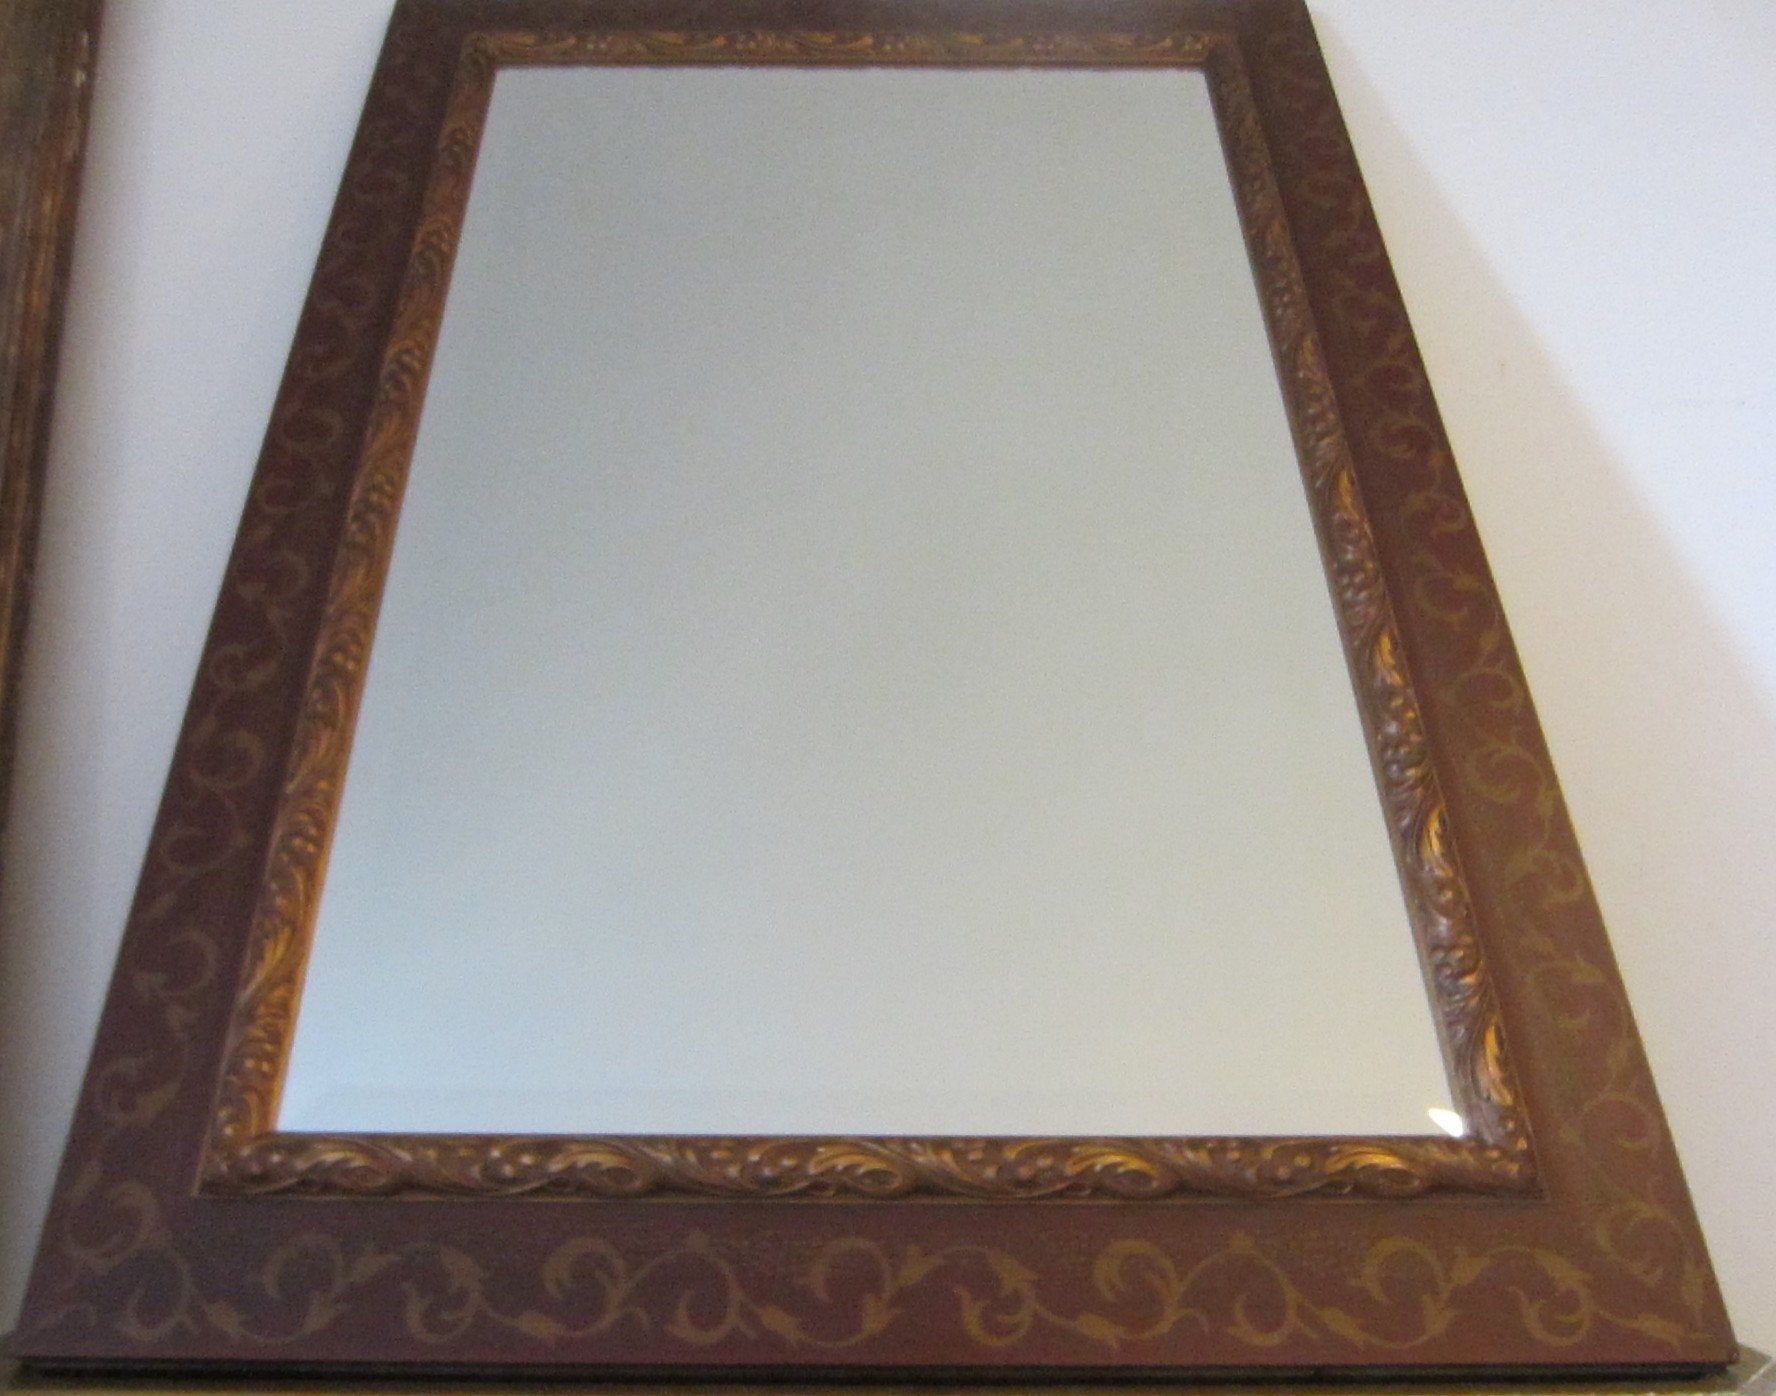 Beveled Mirror Floral Scrolled Gilt Decorated Brown Rectangle Wood Intended For Lugo Rectangle Accent Mirrors (View 14 of 15)